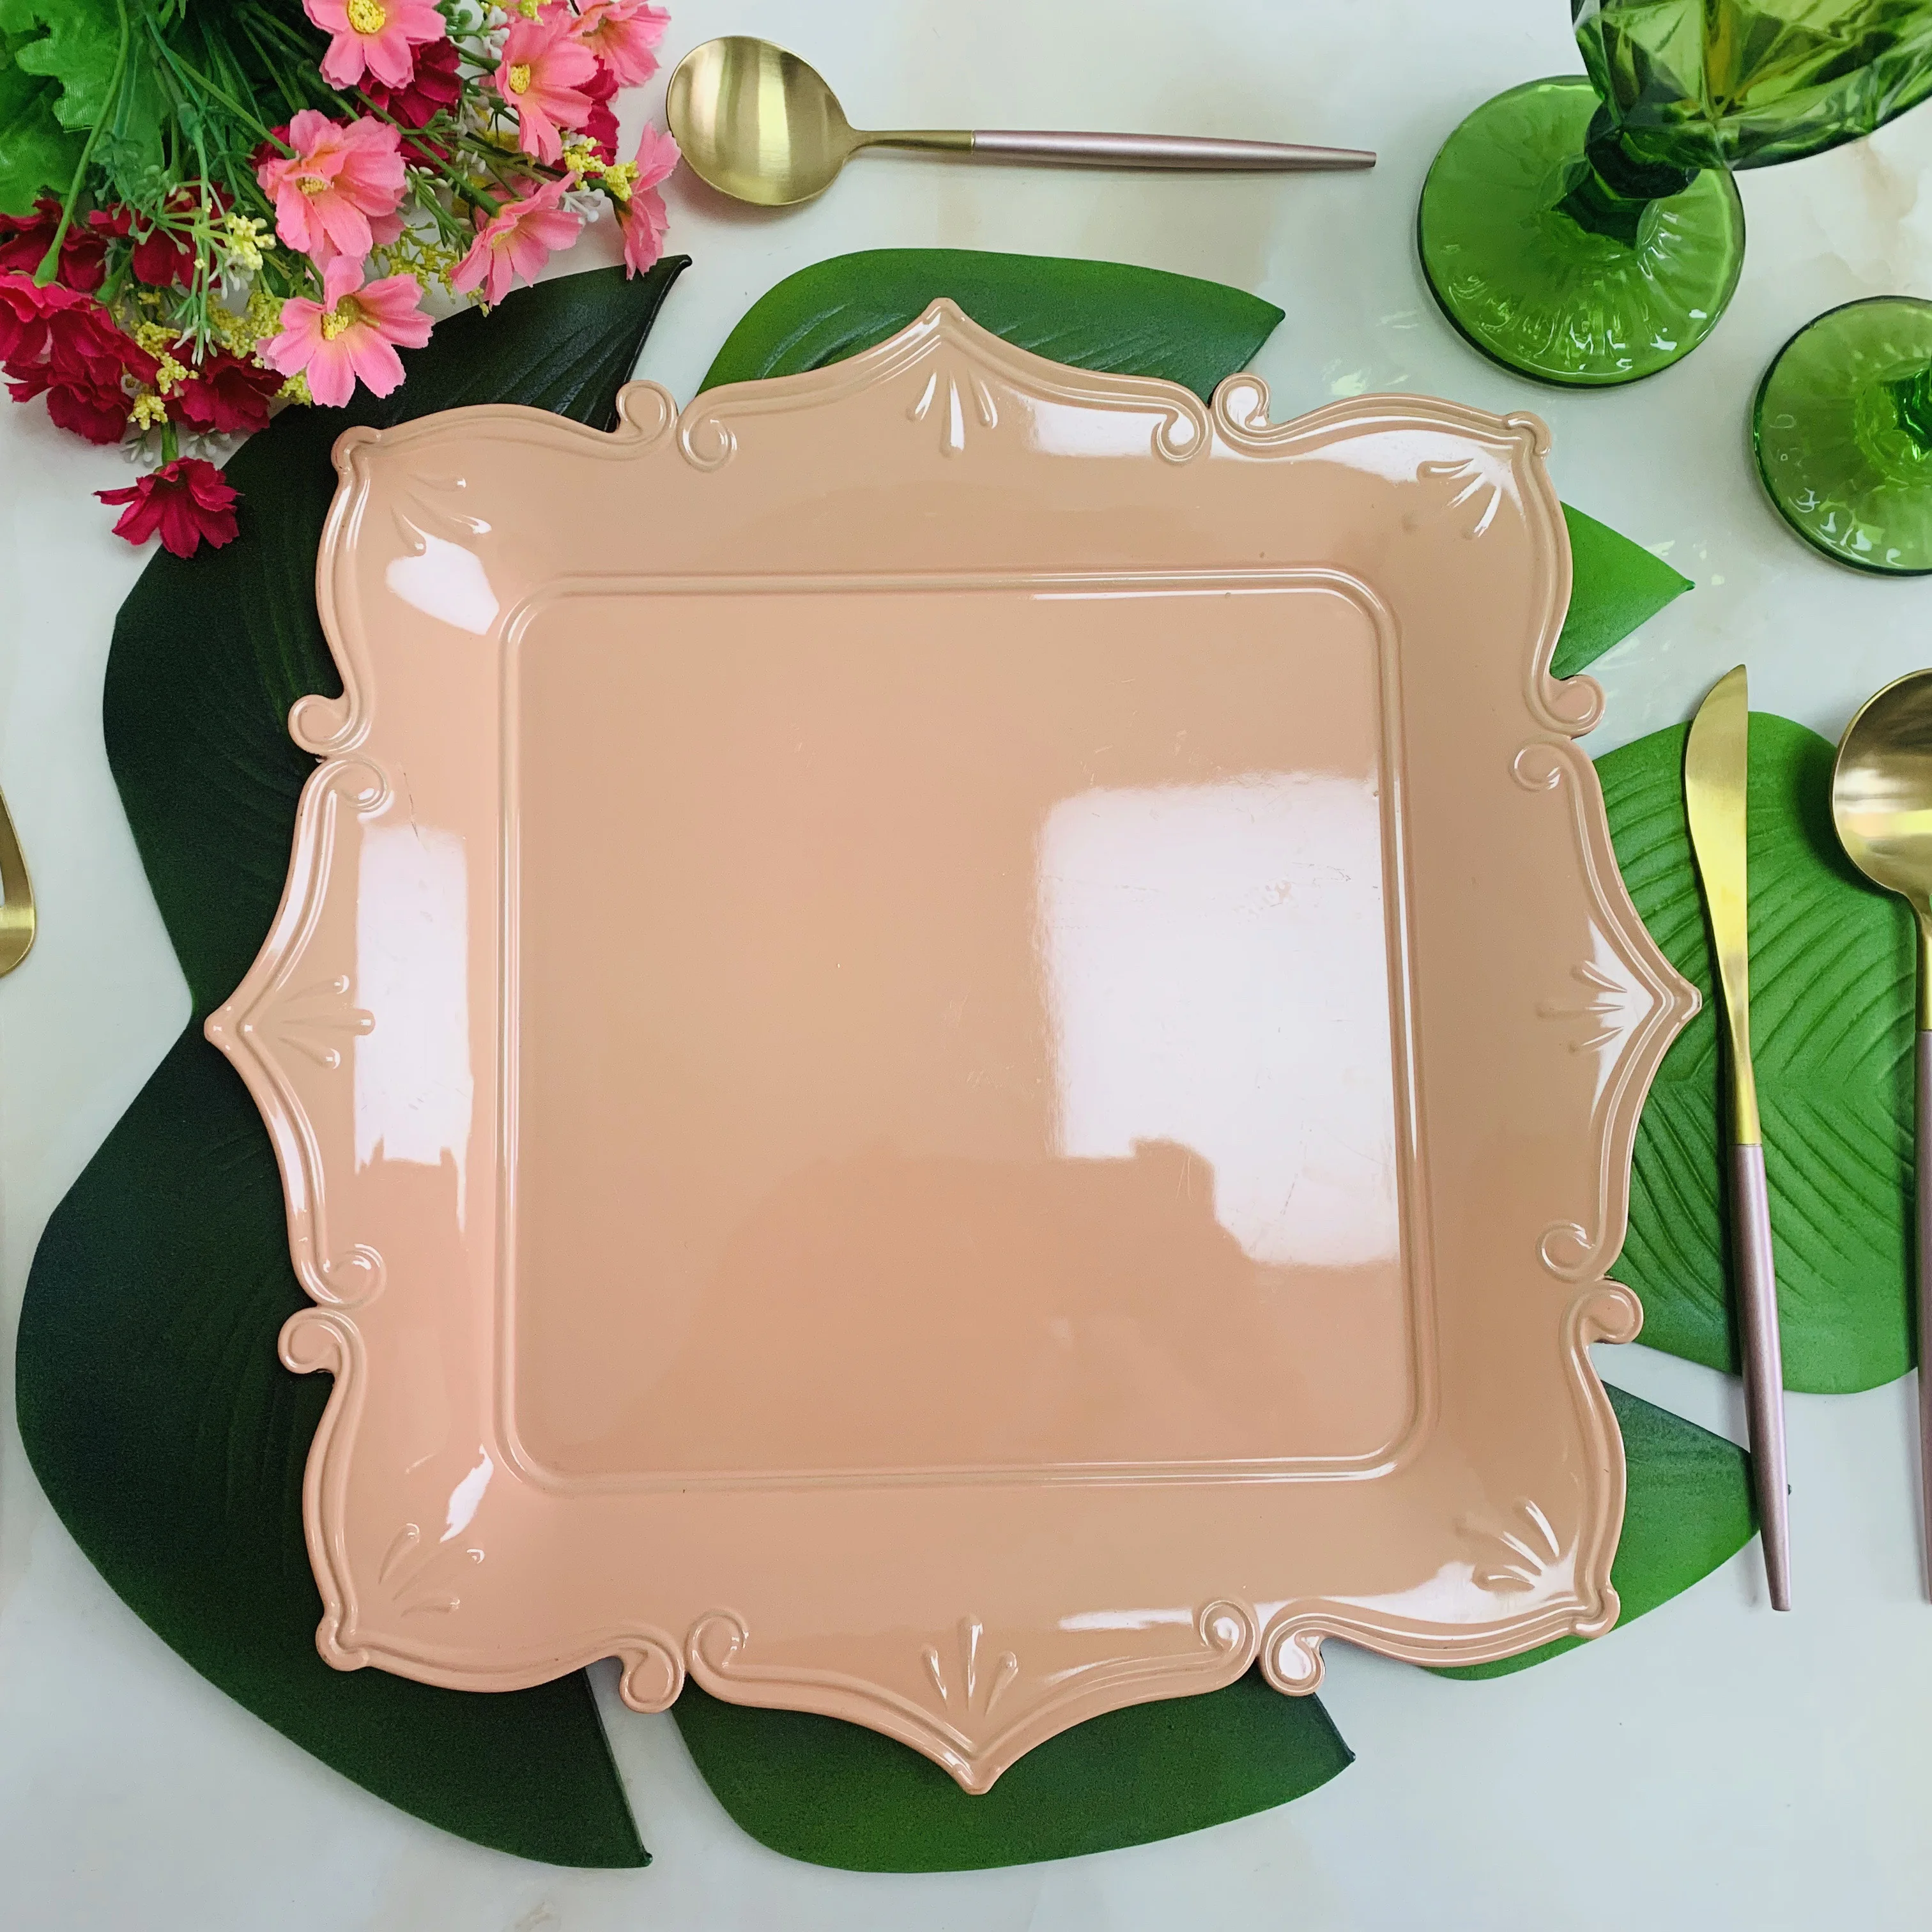 

Acrylic Wholesale Peach Square Plastic High Quality Wedding Cheap Disposable Embossed 13 Inches Charger Plate